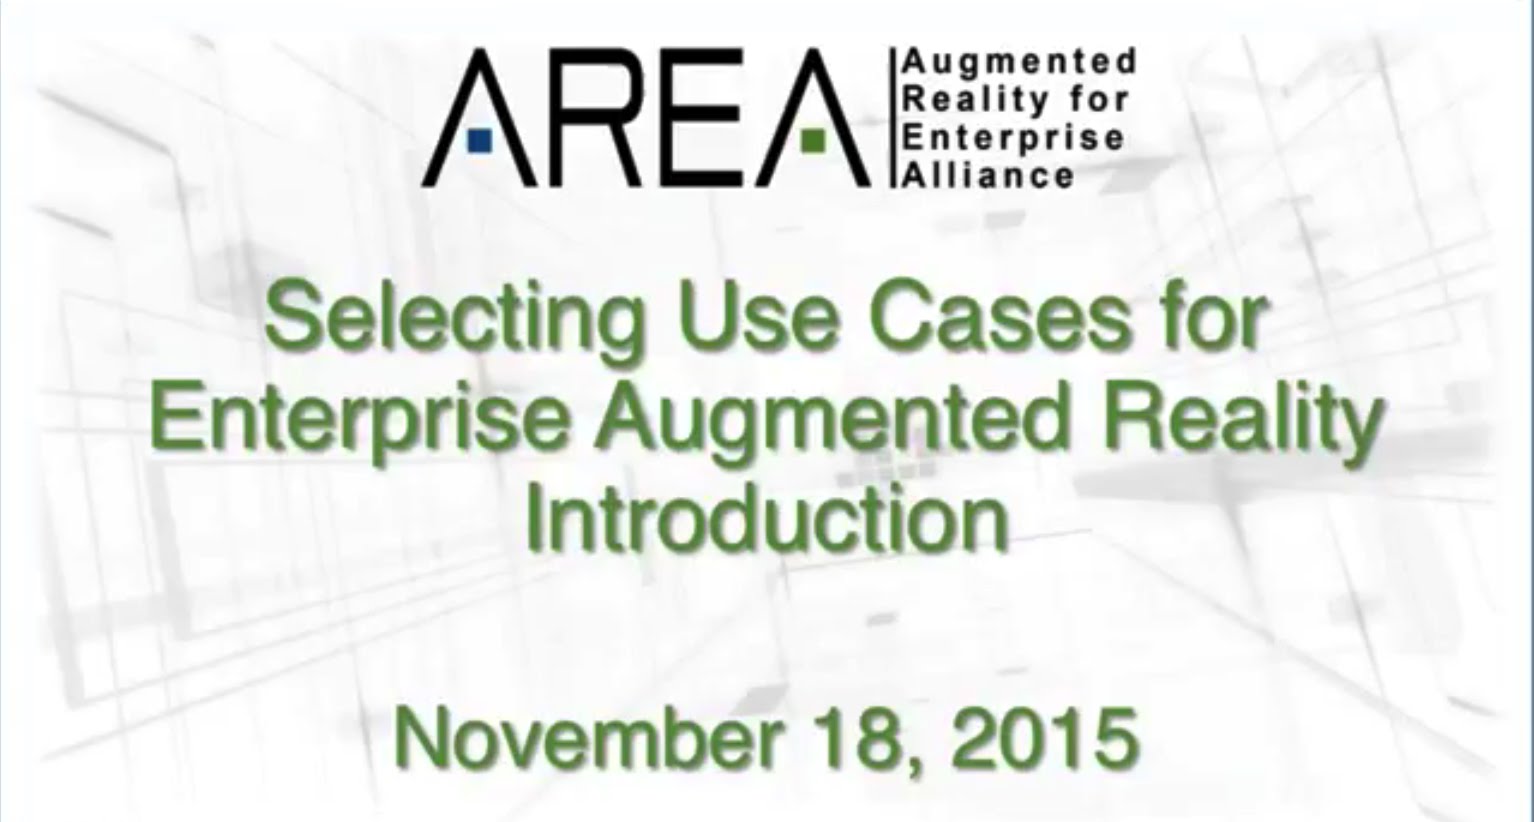 AREA Webinar | Selecting Use Cases for Enterprise Augmented Reality Introduction